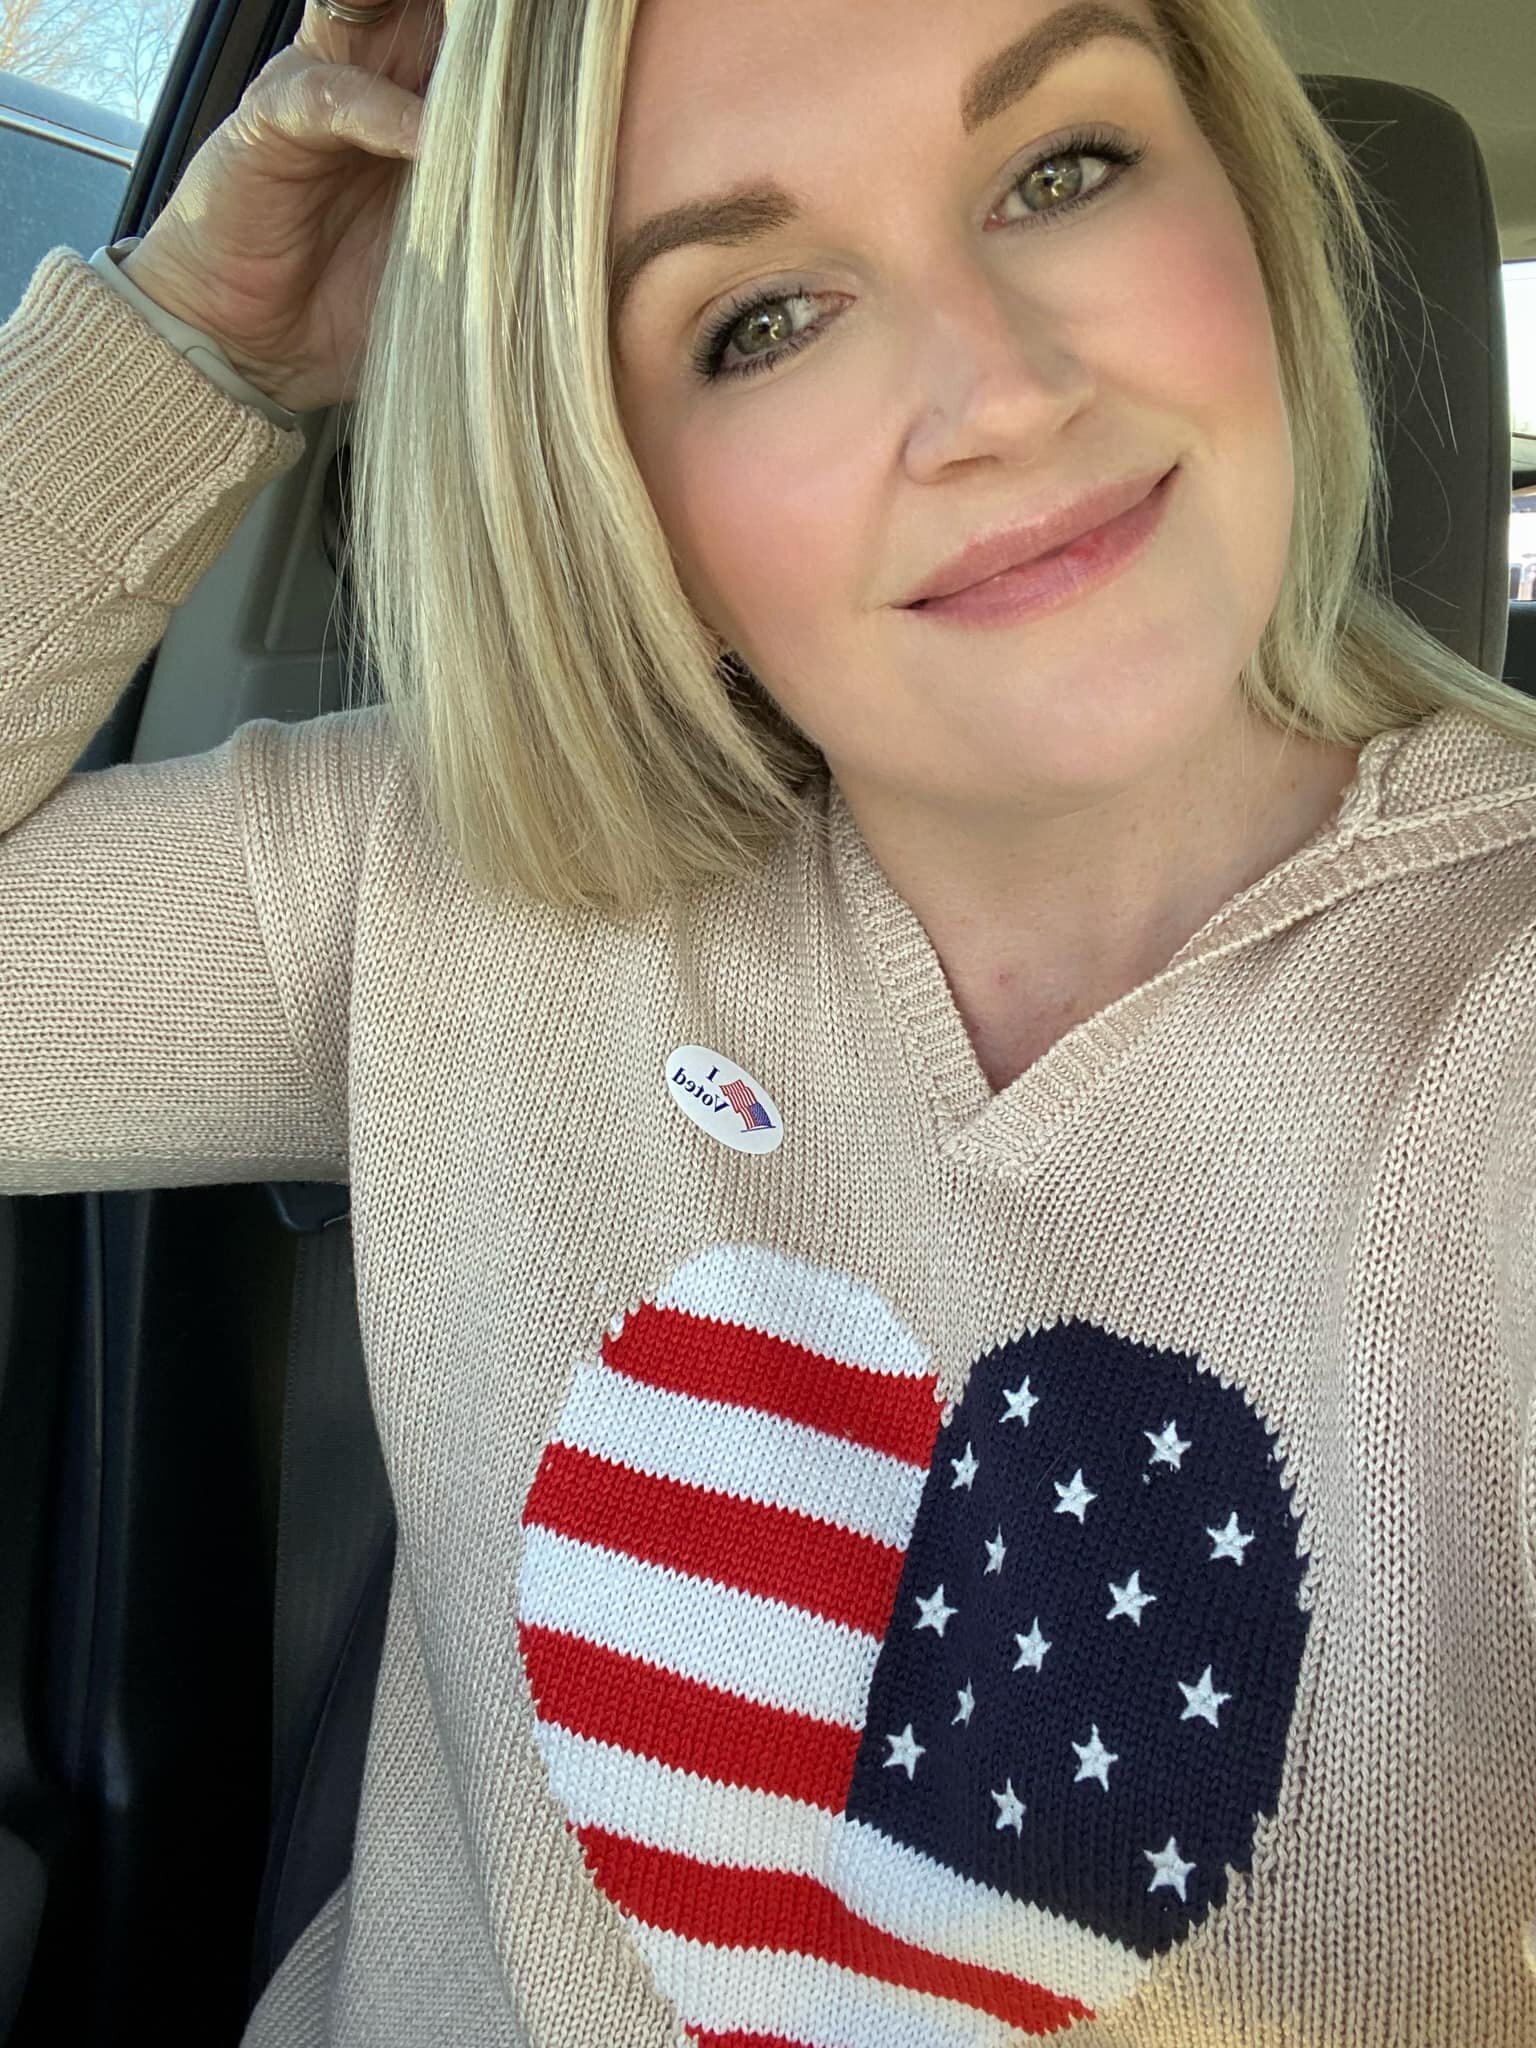 Had to drive 45 minutes but got it done! 🇺🇸
#noexcuses #VoteBlue2022